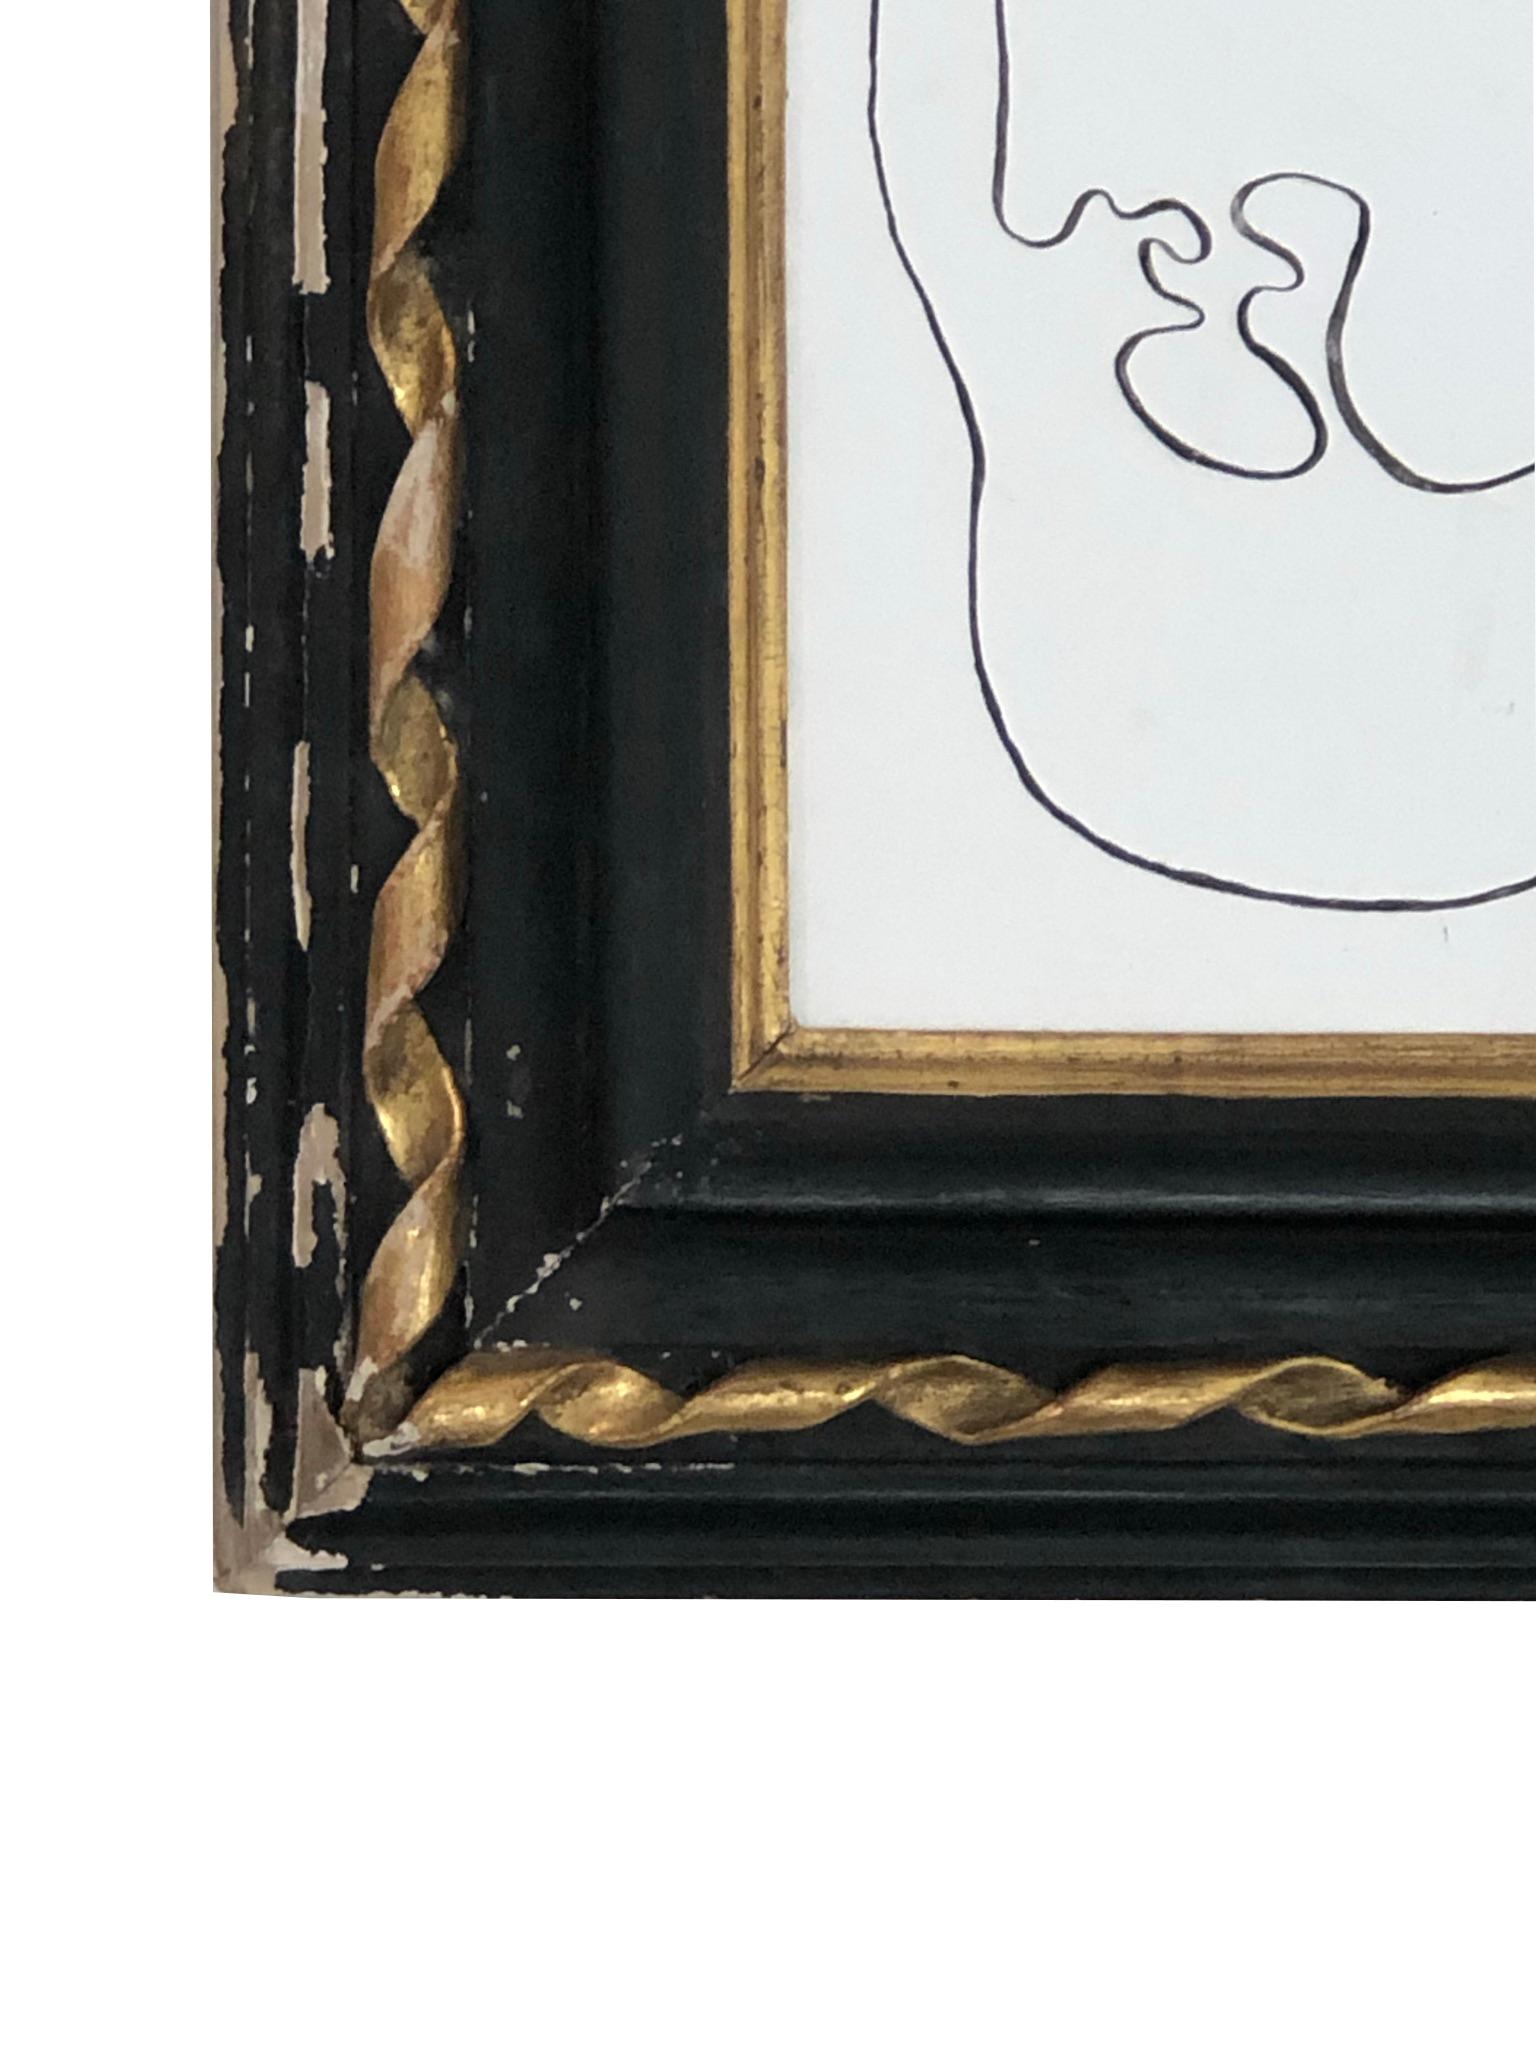 Beautiful modern painting line art style entitled Modern Duo. The subject matter is reminiscent of Picasso style artwork. The painting canvas is prepared with Venetian plaster and framed in an antique black and gold gesso and wood frame.